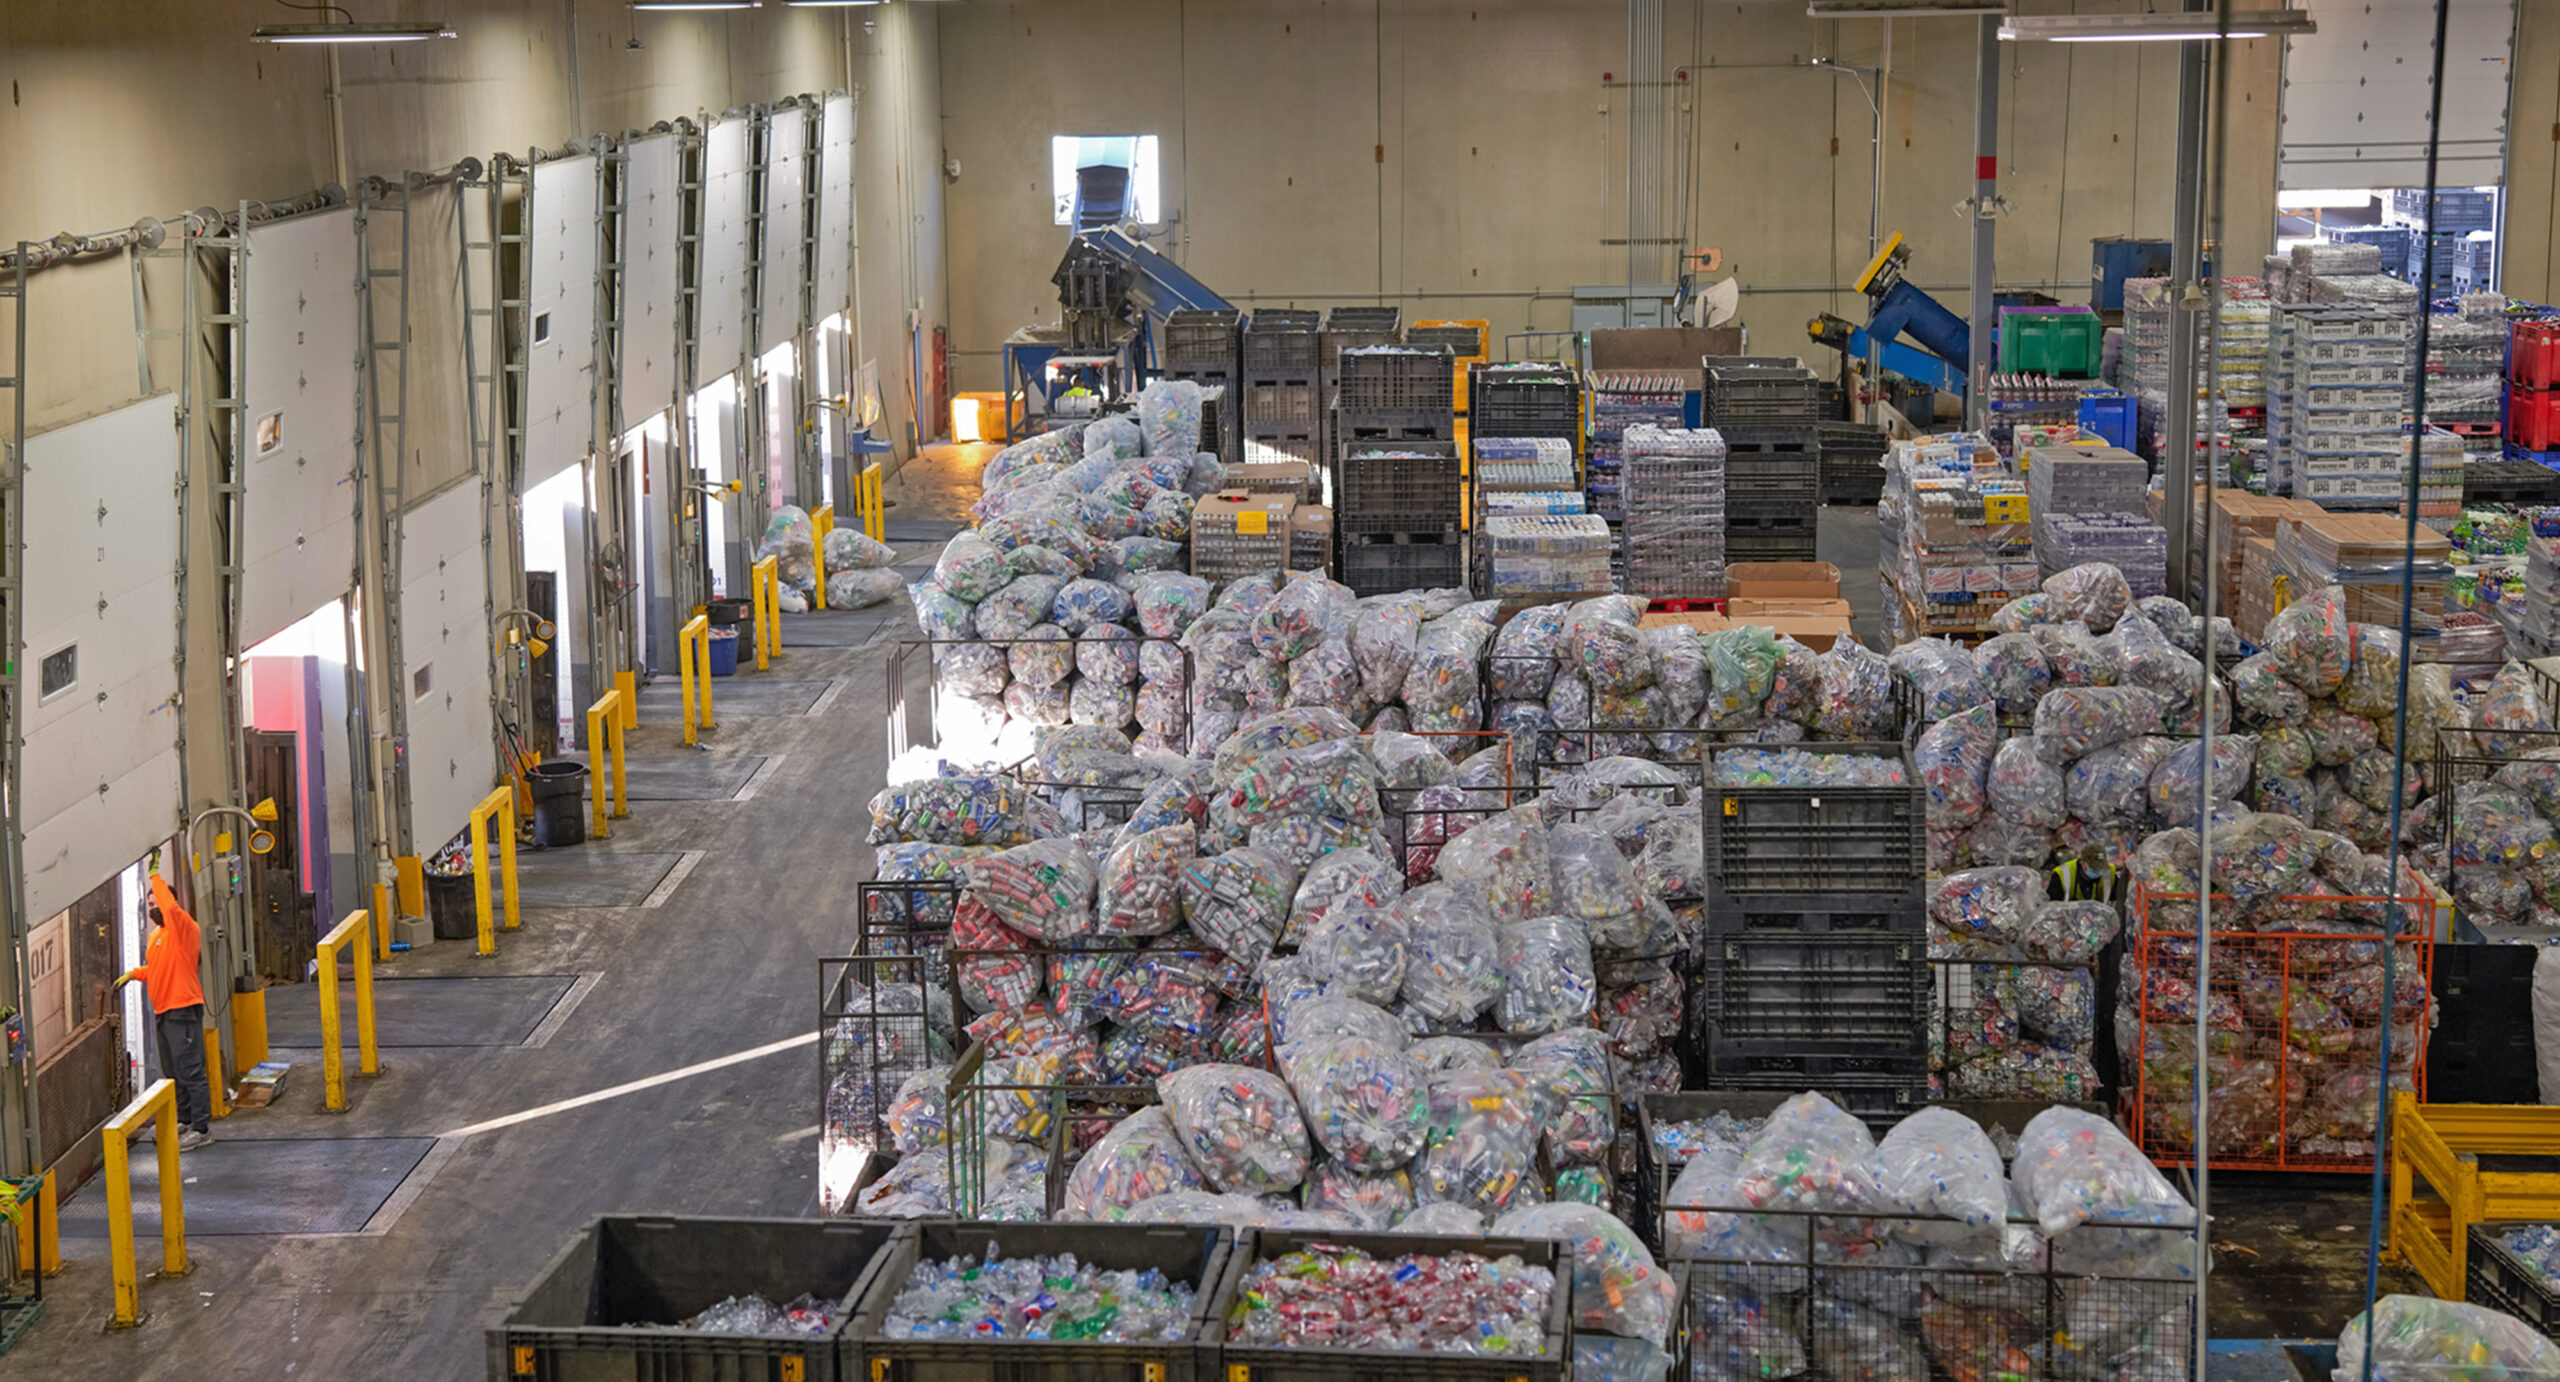 The Oregon Beverage Recycling Cooperative plant full of bags of recyclable containers.